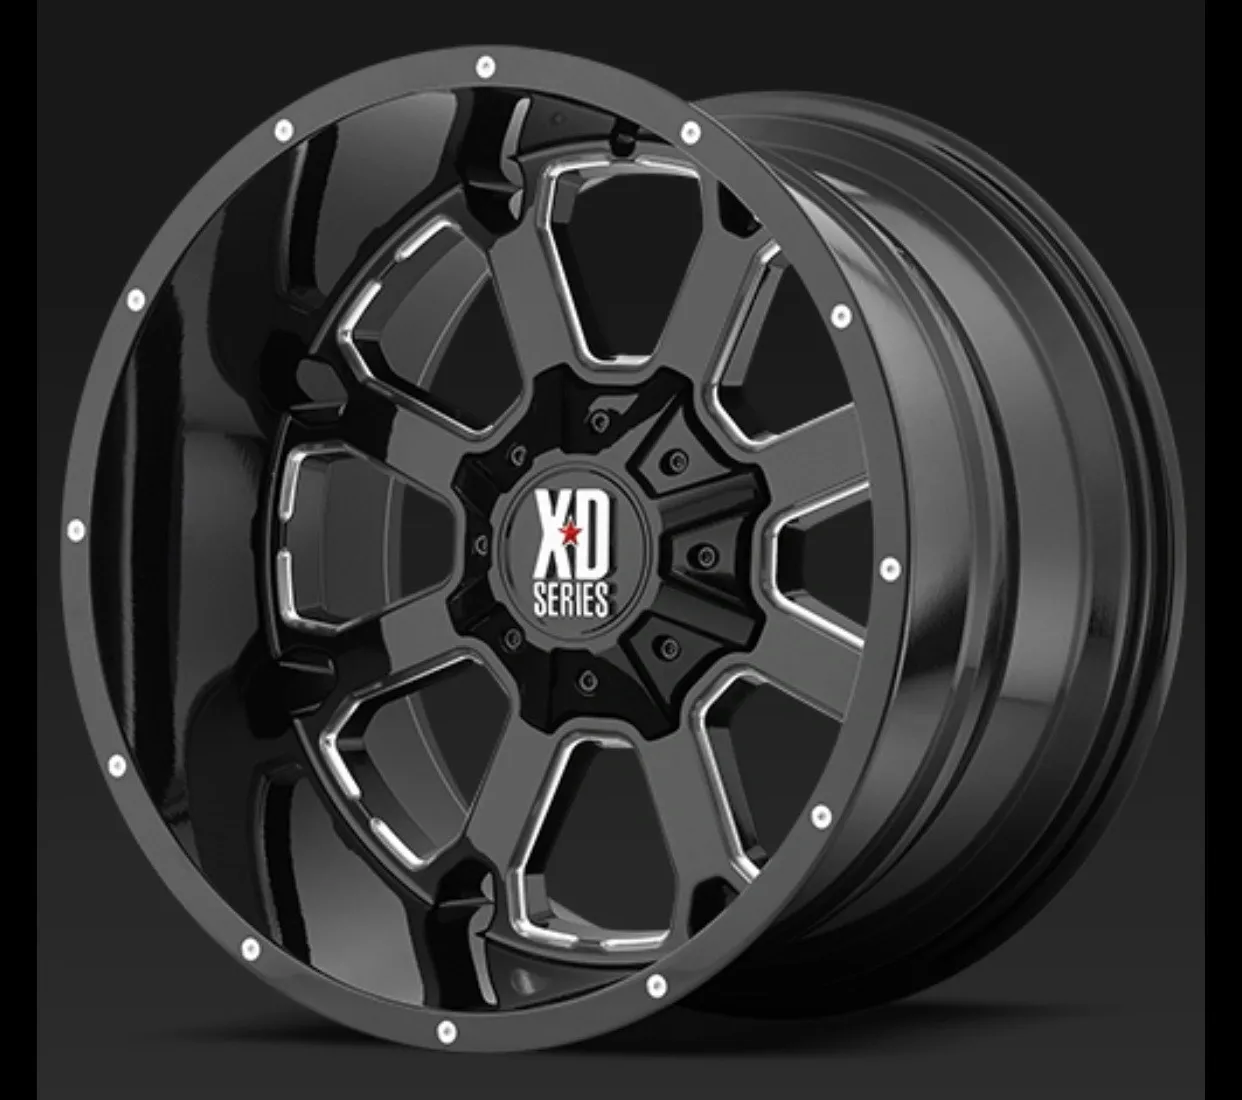 A black and chrome rim with white accents